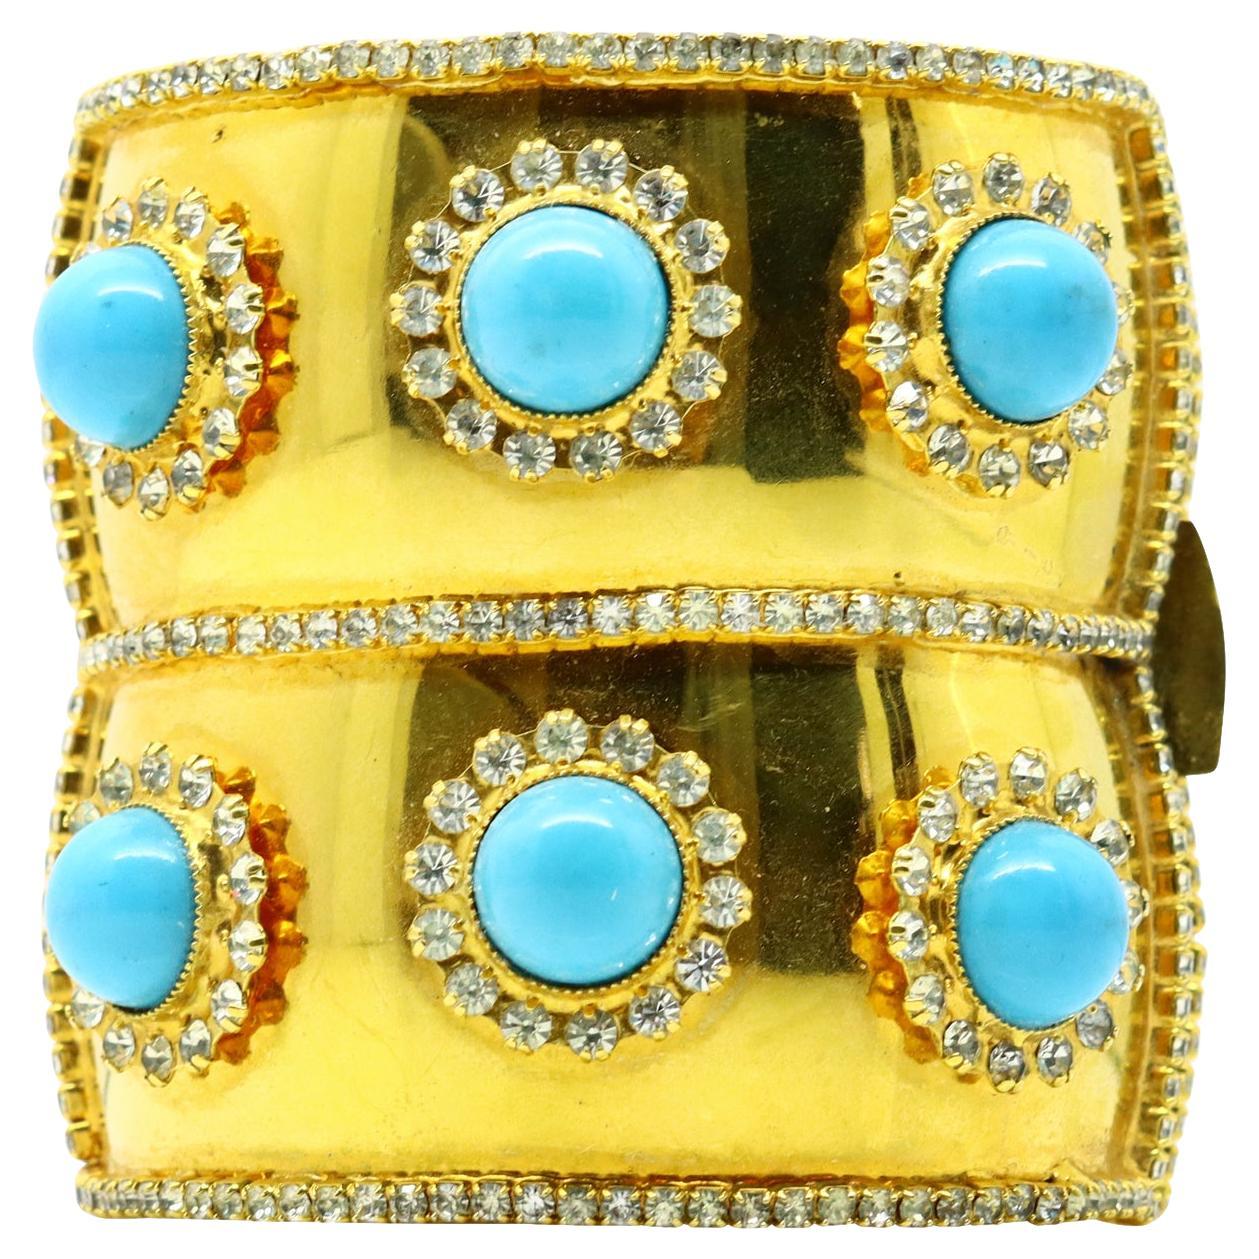 Vintage deLillo Gold Tone Crystal with Faux Turquoise Bracelet Circa !970s For Sale 5